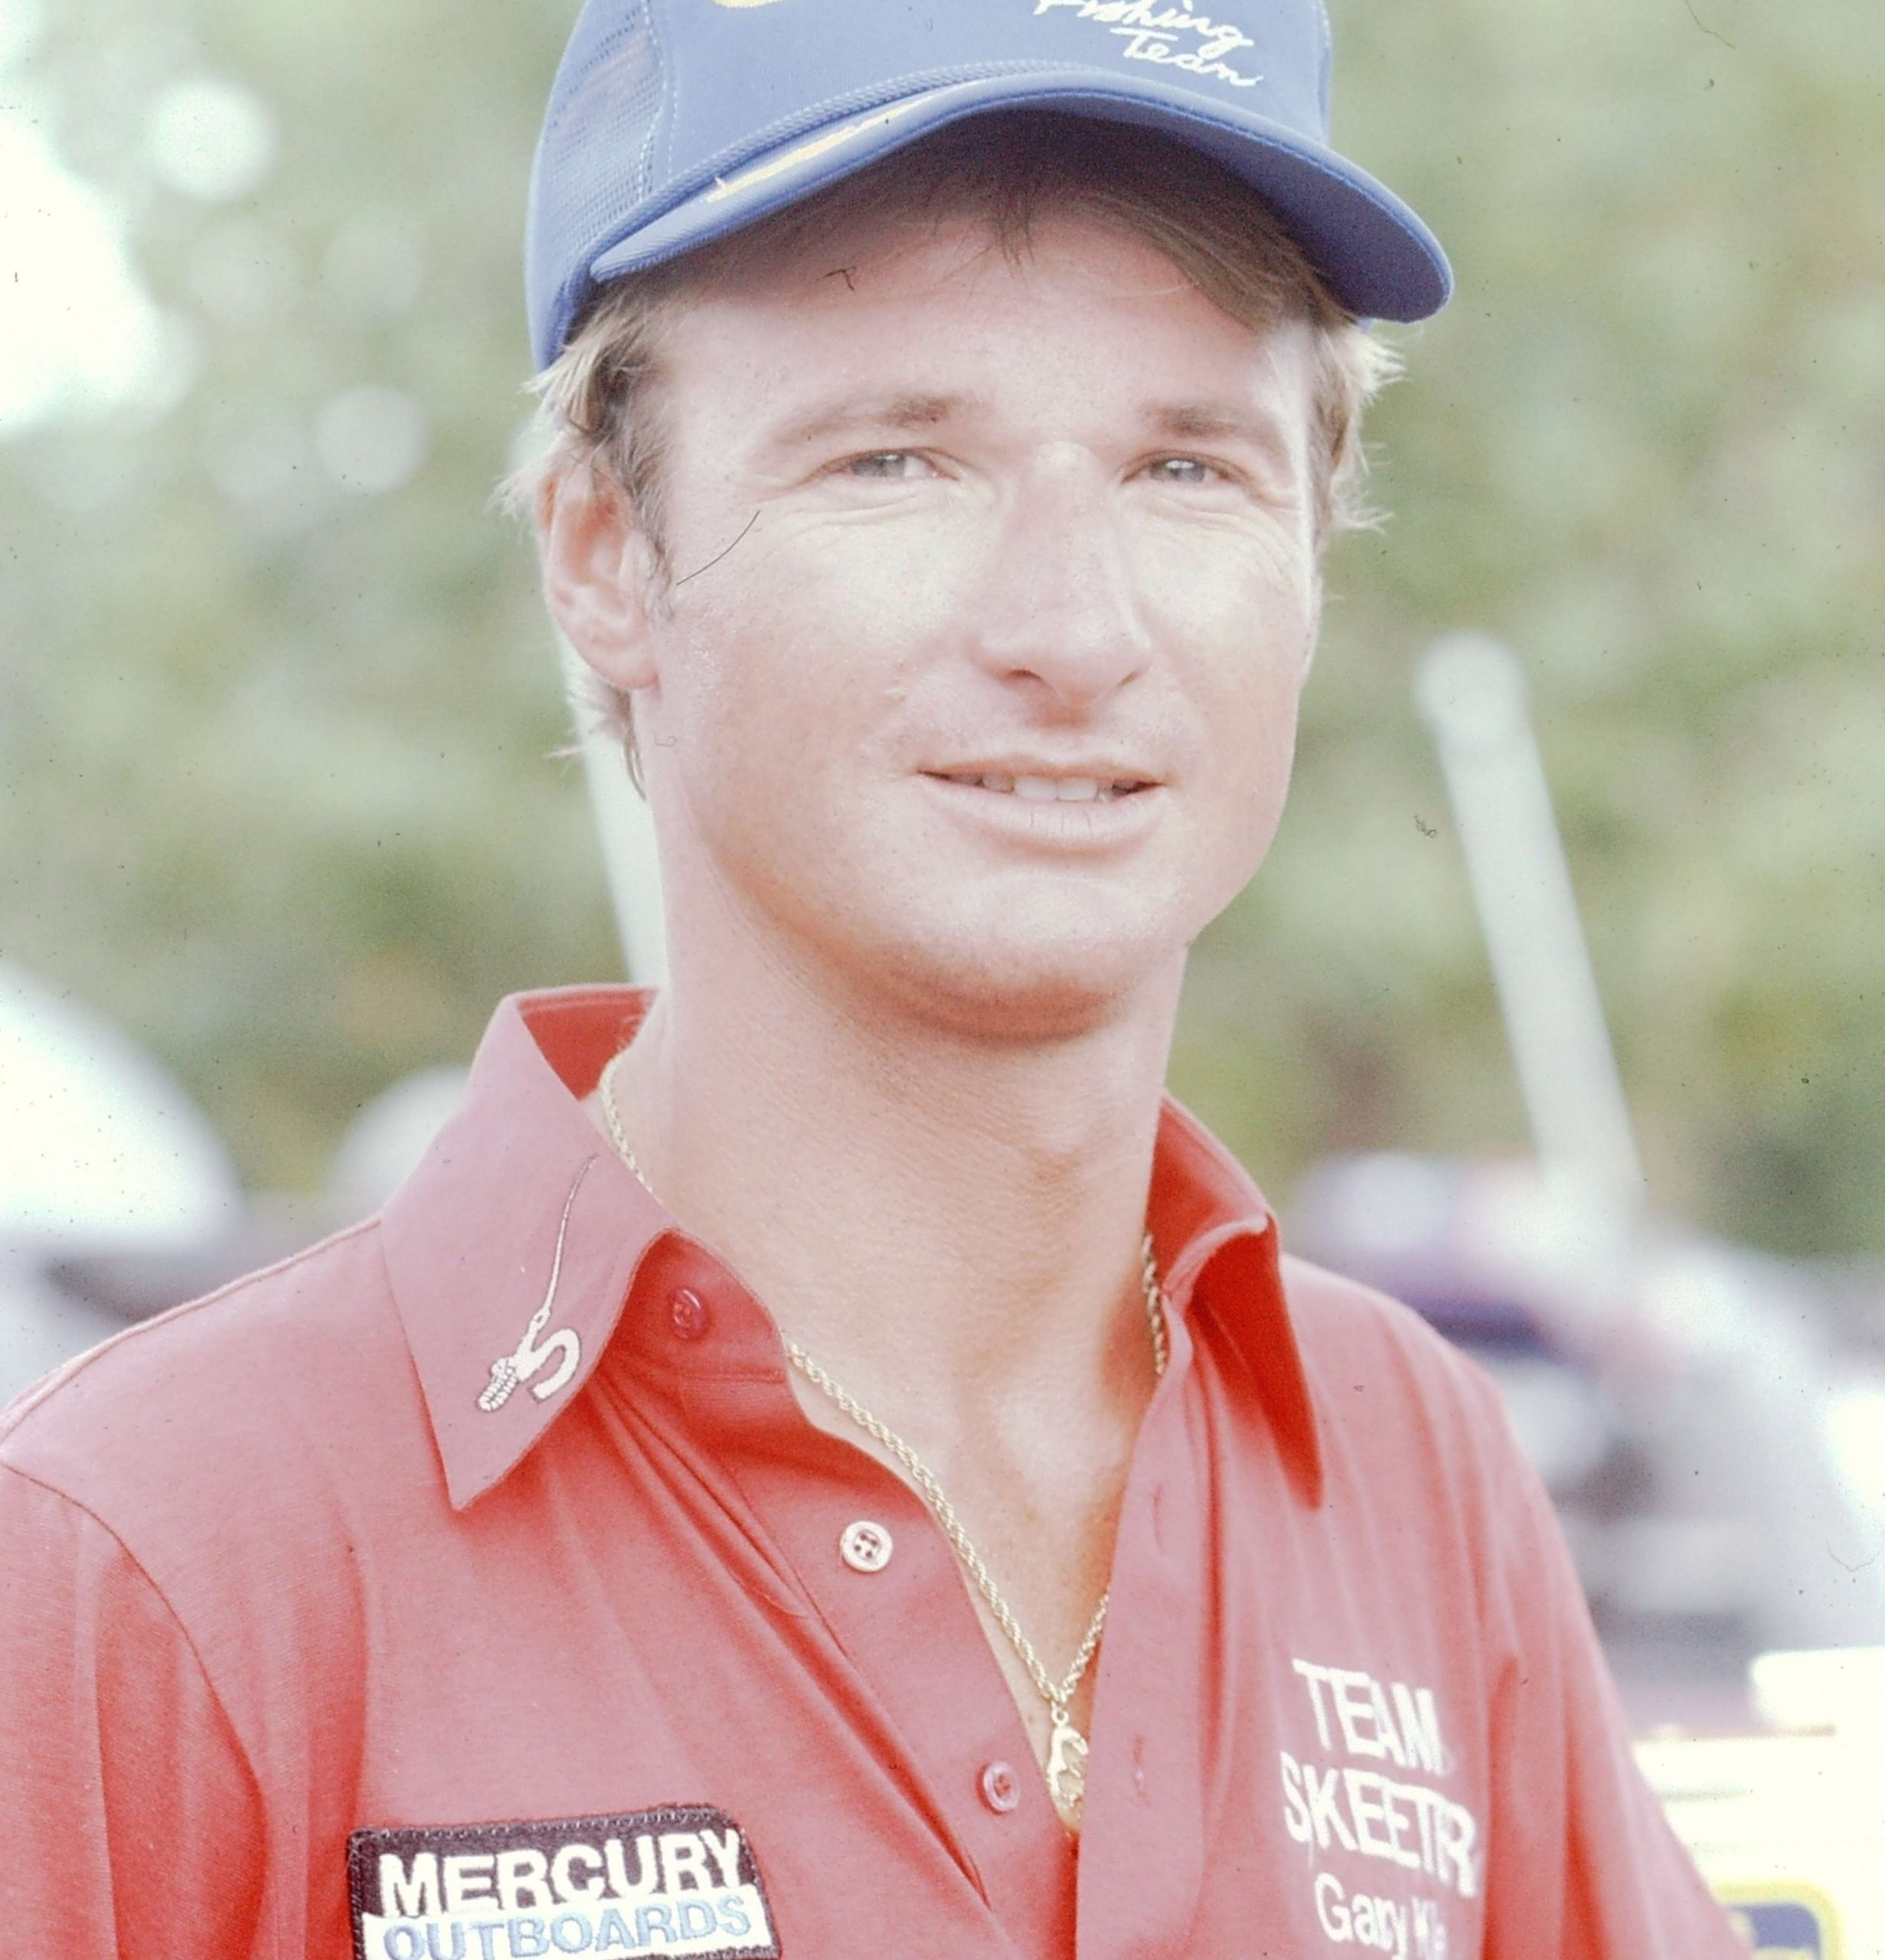 Similarly, Gary Klein has competed in 30 Classics and has yet to win one. He was in the hunt in 1986, with 22-1 that put him in fourth place at the end.